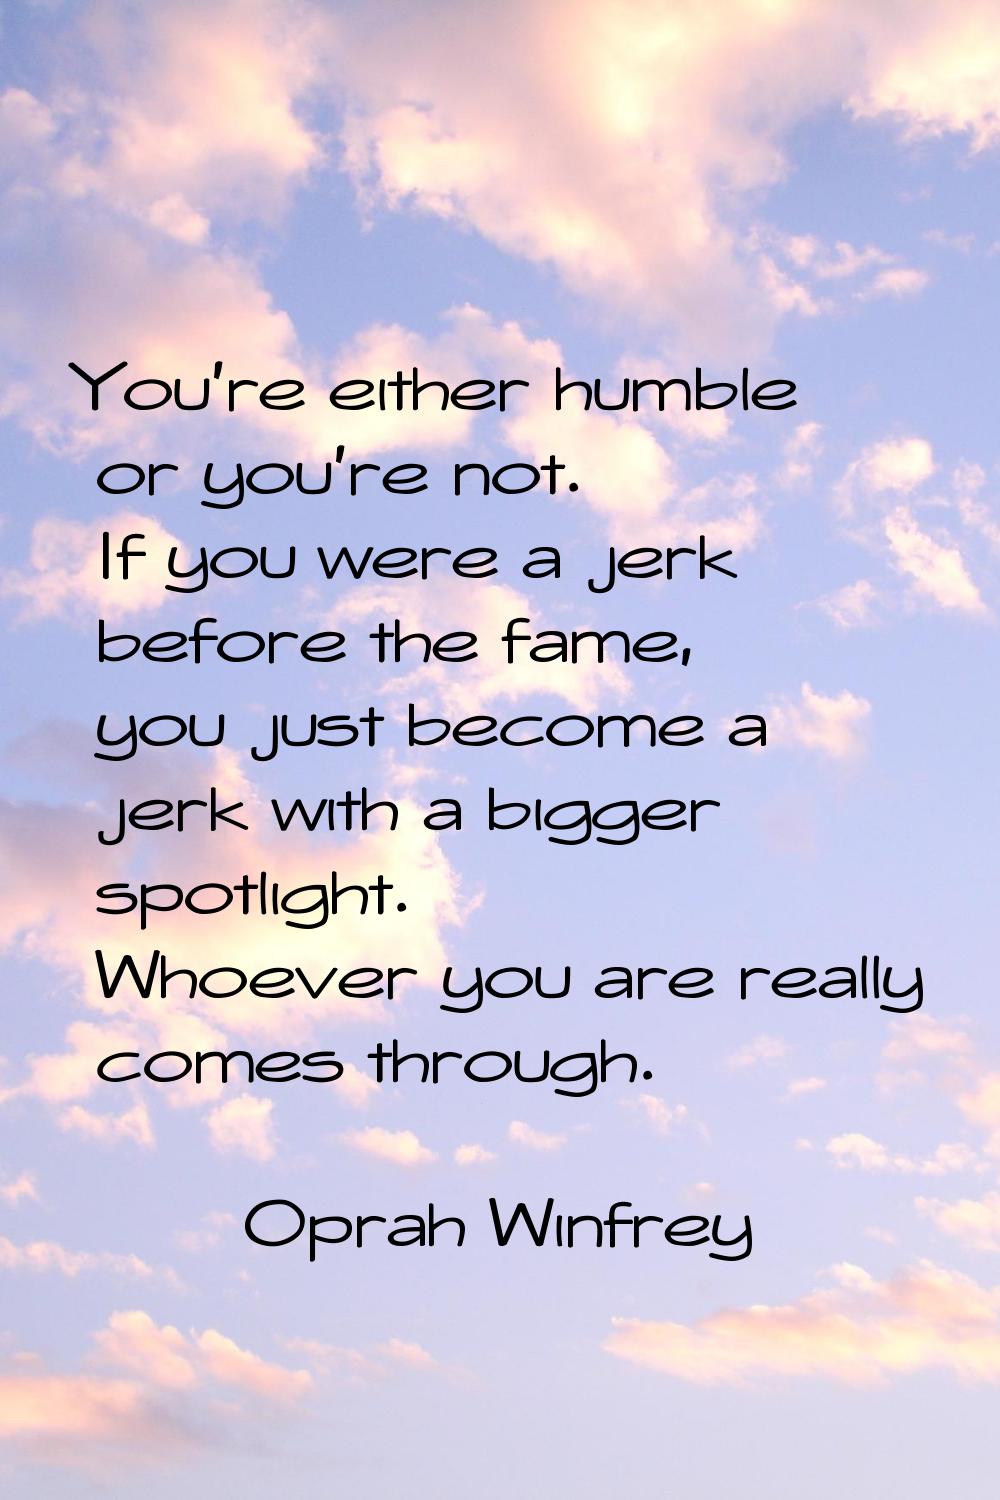 You're either humble or you're not. If you were a jerk before the fame, you just become a jerk with